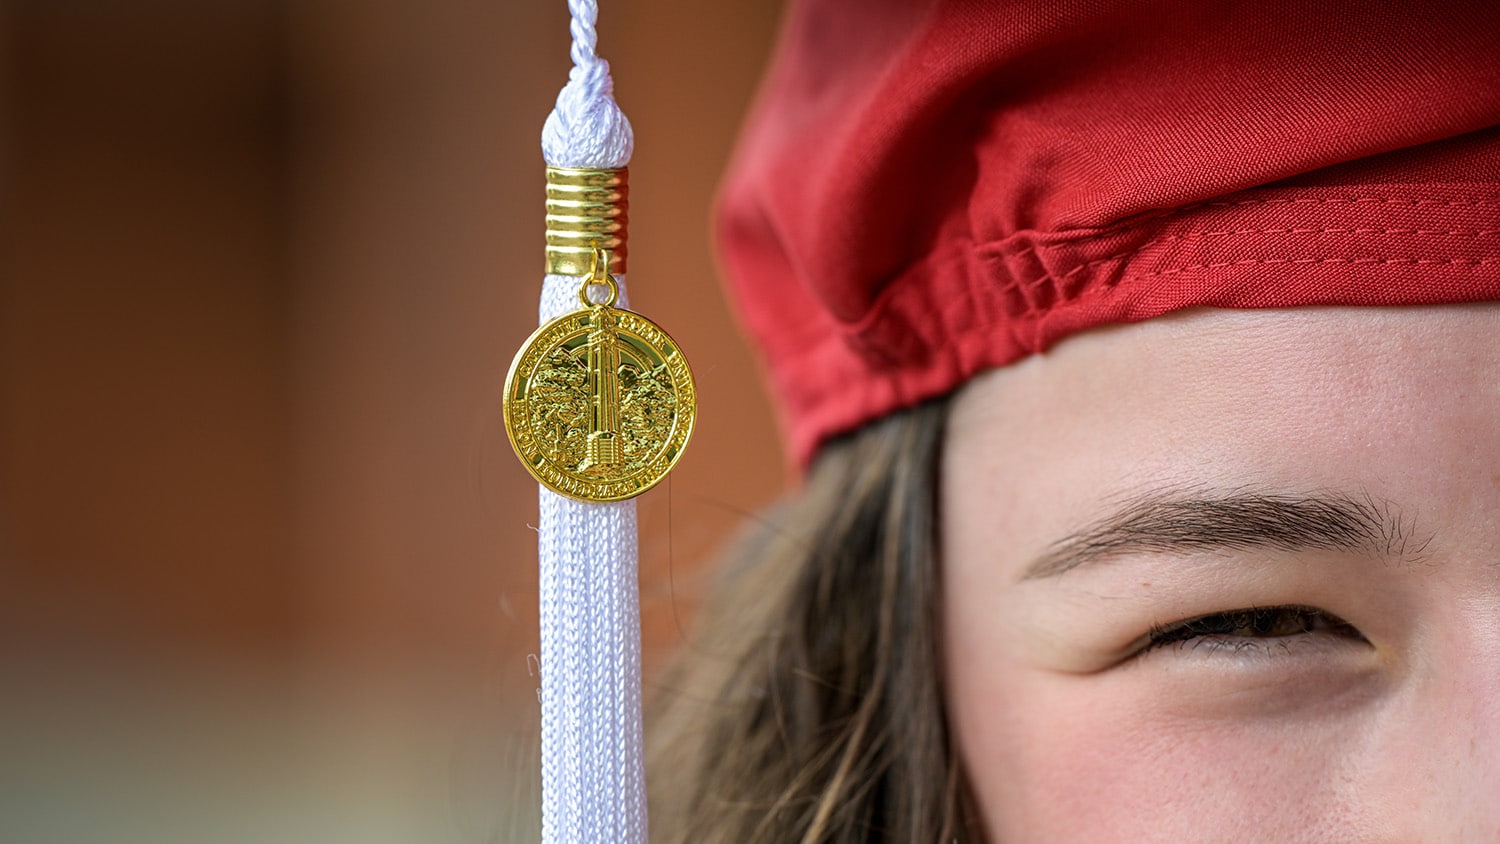 A close-up of the while and gold tassel on a graduating woman's commencement mortarboard.